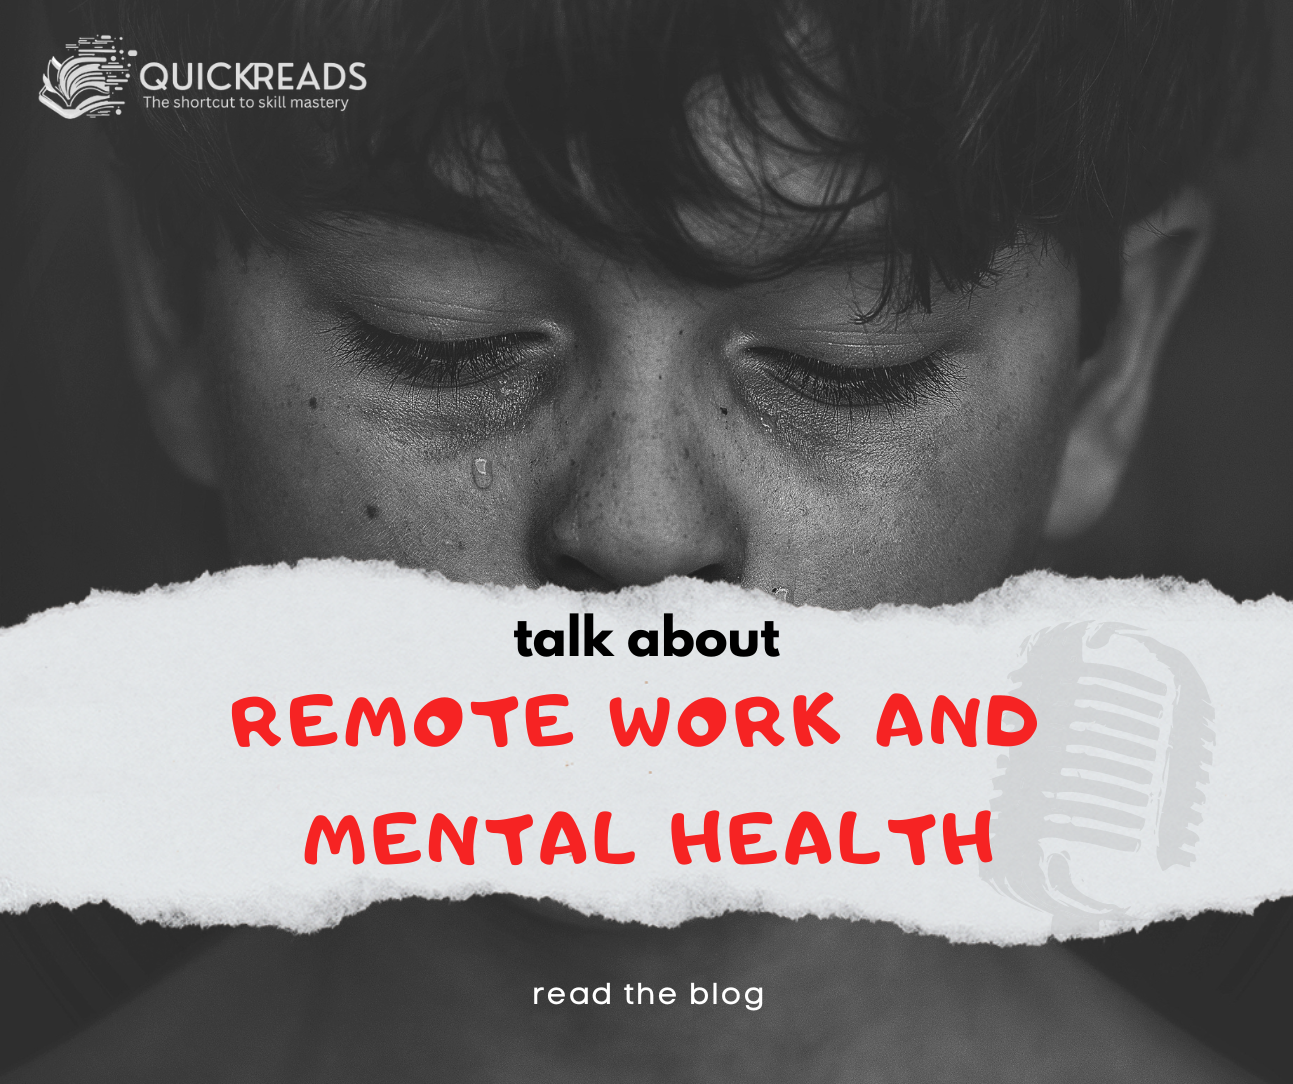 Remote work and mental health